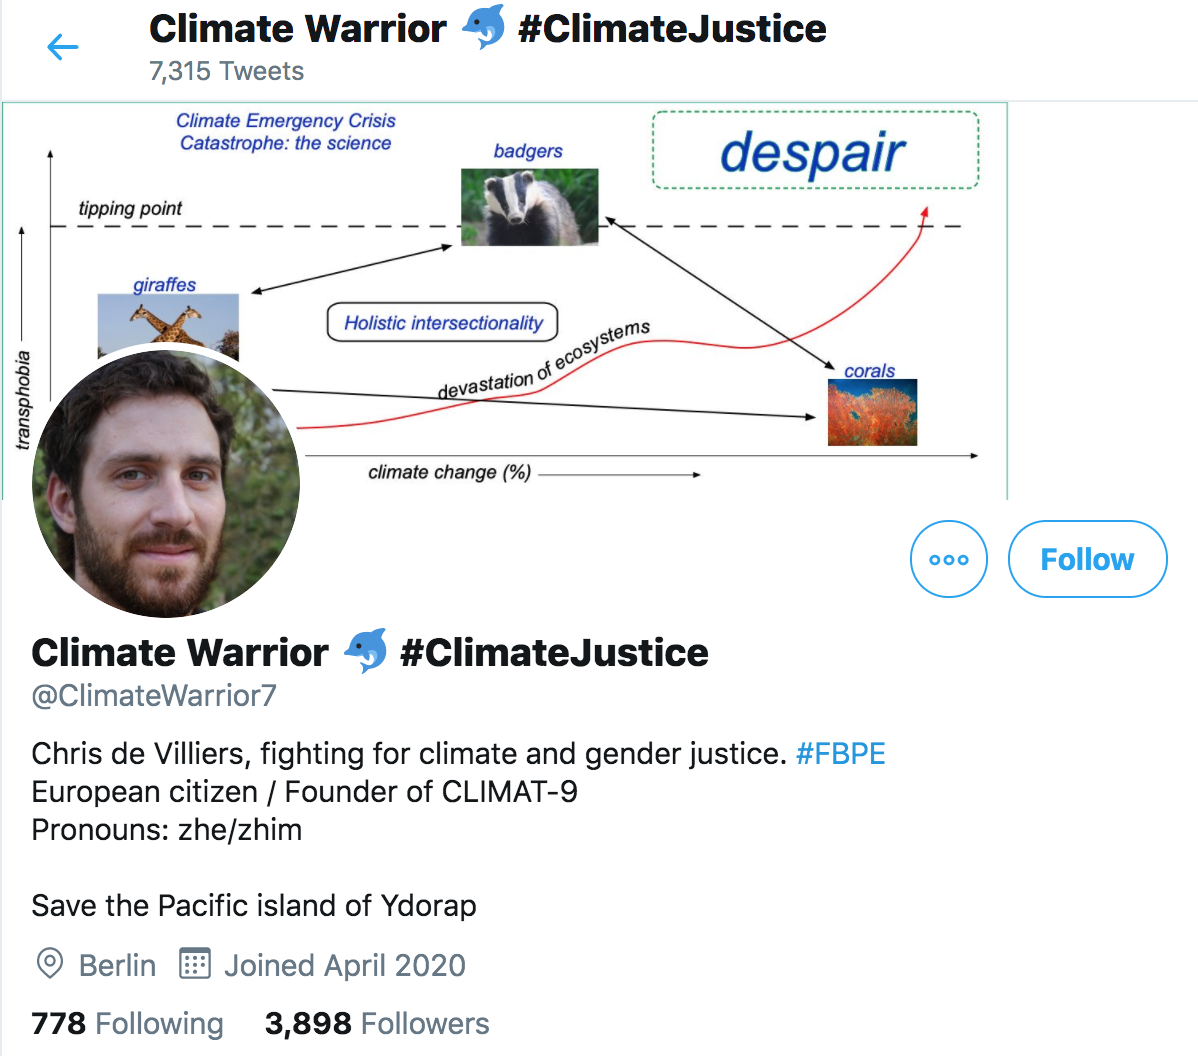 Next up, we have supposed climate activist  @ClimateWarrior7, which spends more of its time engaging in bigotry via irony than actually saying anything meaningful about climate change.